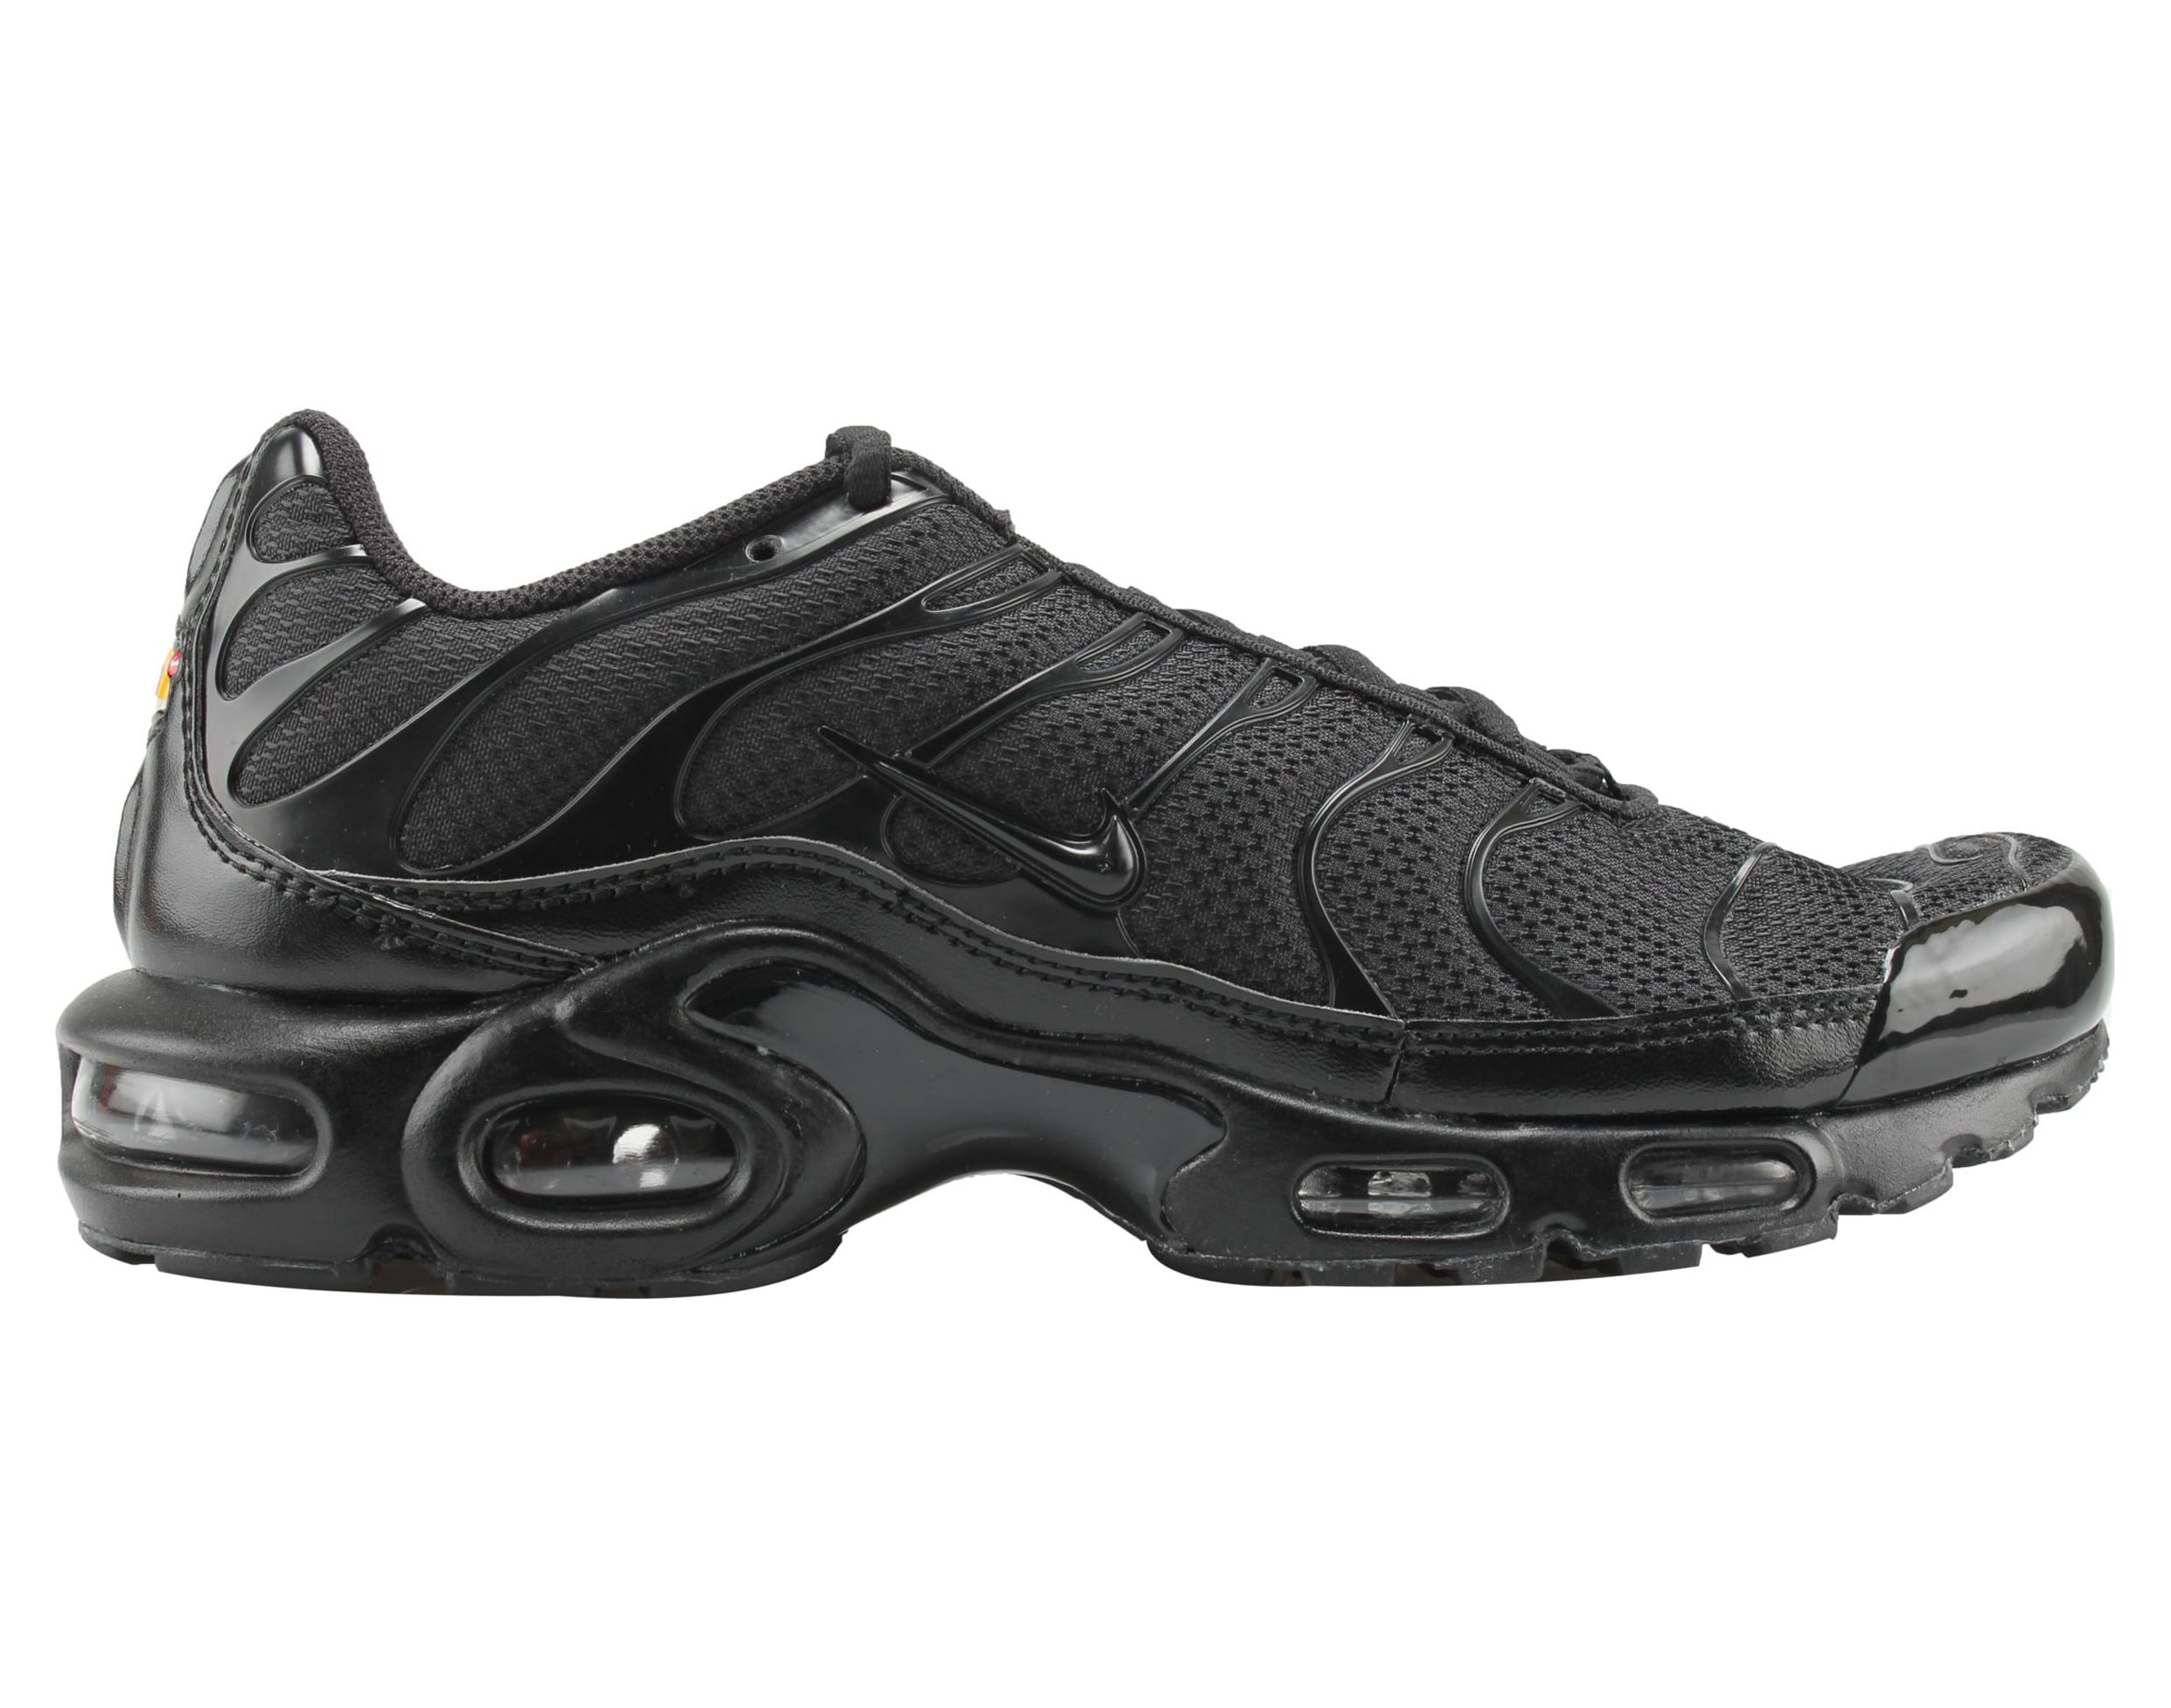 Nike Men's Air Max Plus Tuned 1 Fabric Trainer Shoes - image 2 of 6